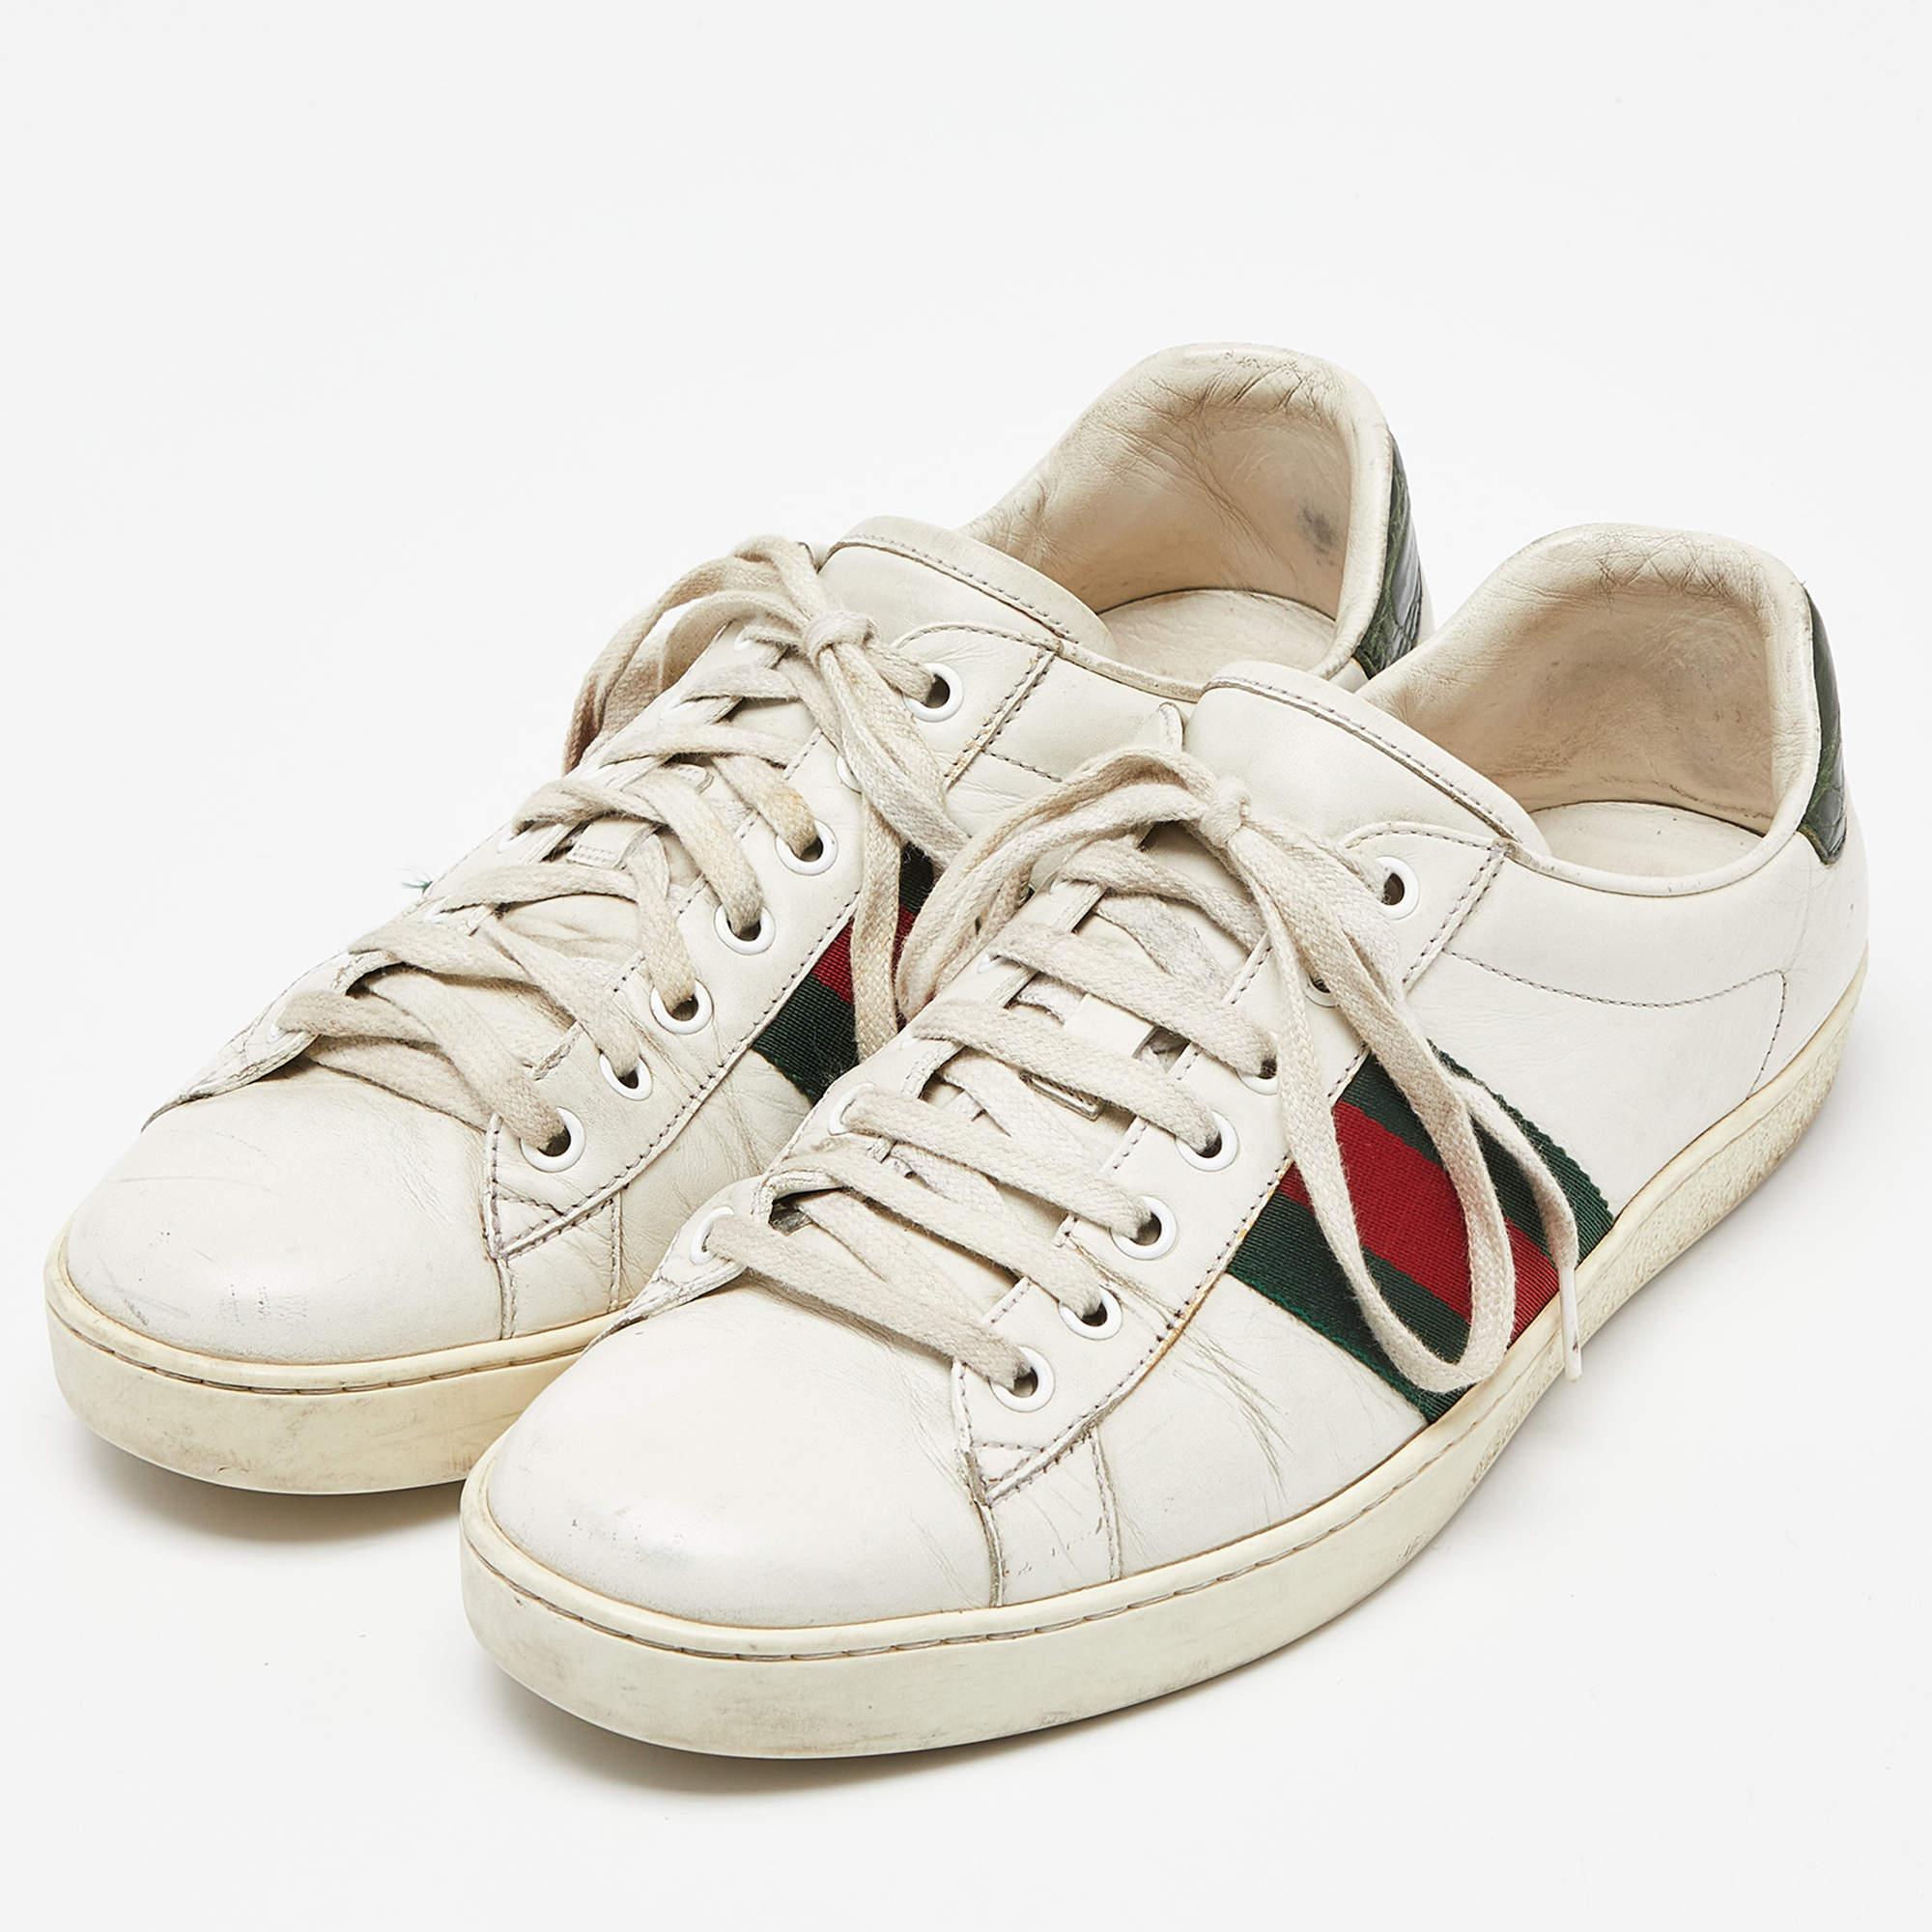 Give your outfit a chic update with this pair of Gucci white Ace sneakers. The creation is sewn perfectly to help you make a statement in them for a long time.

